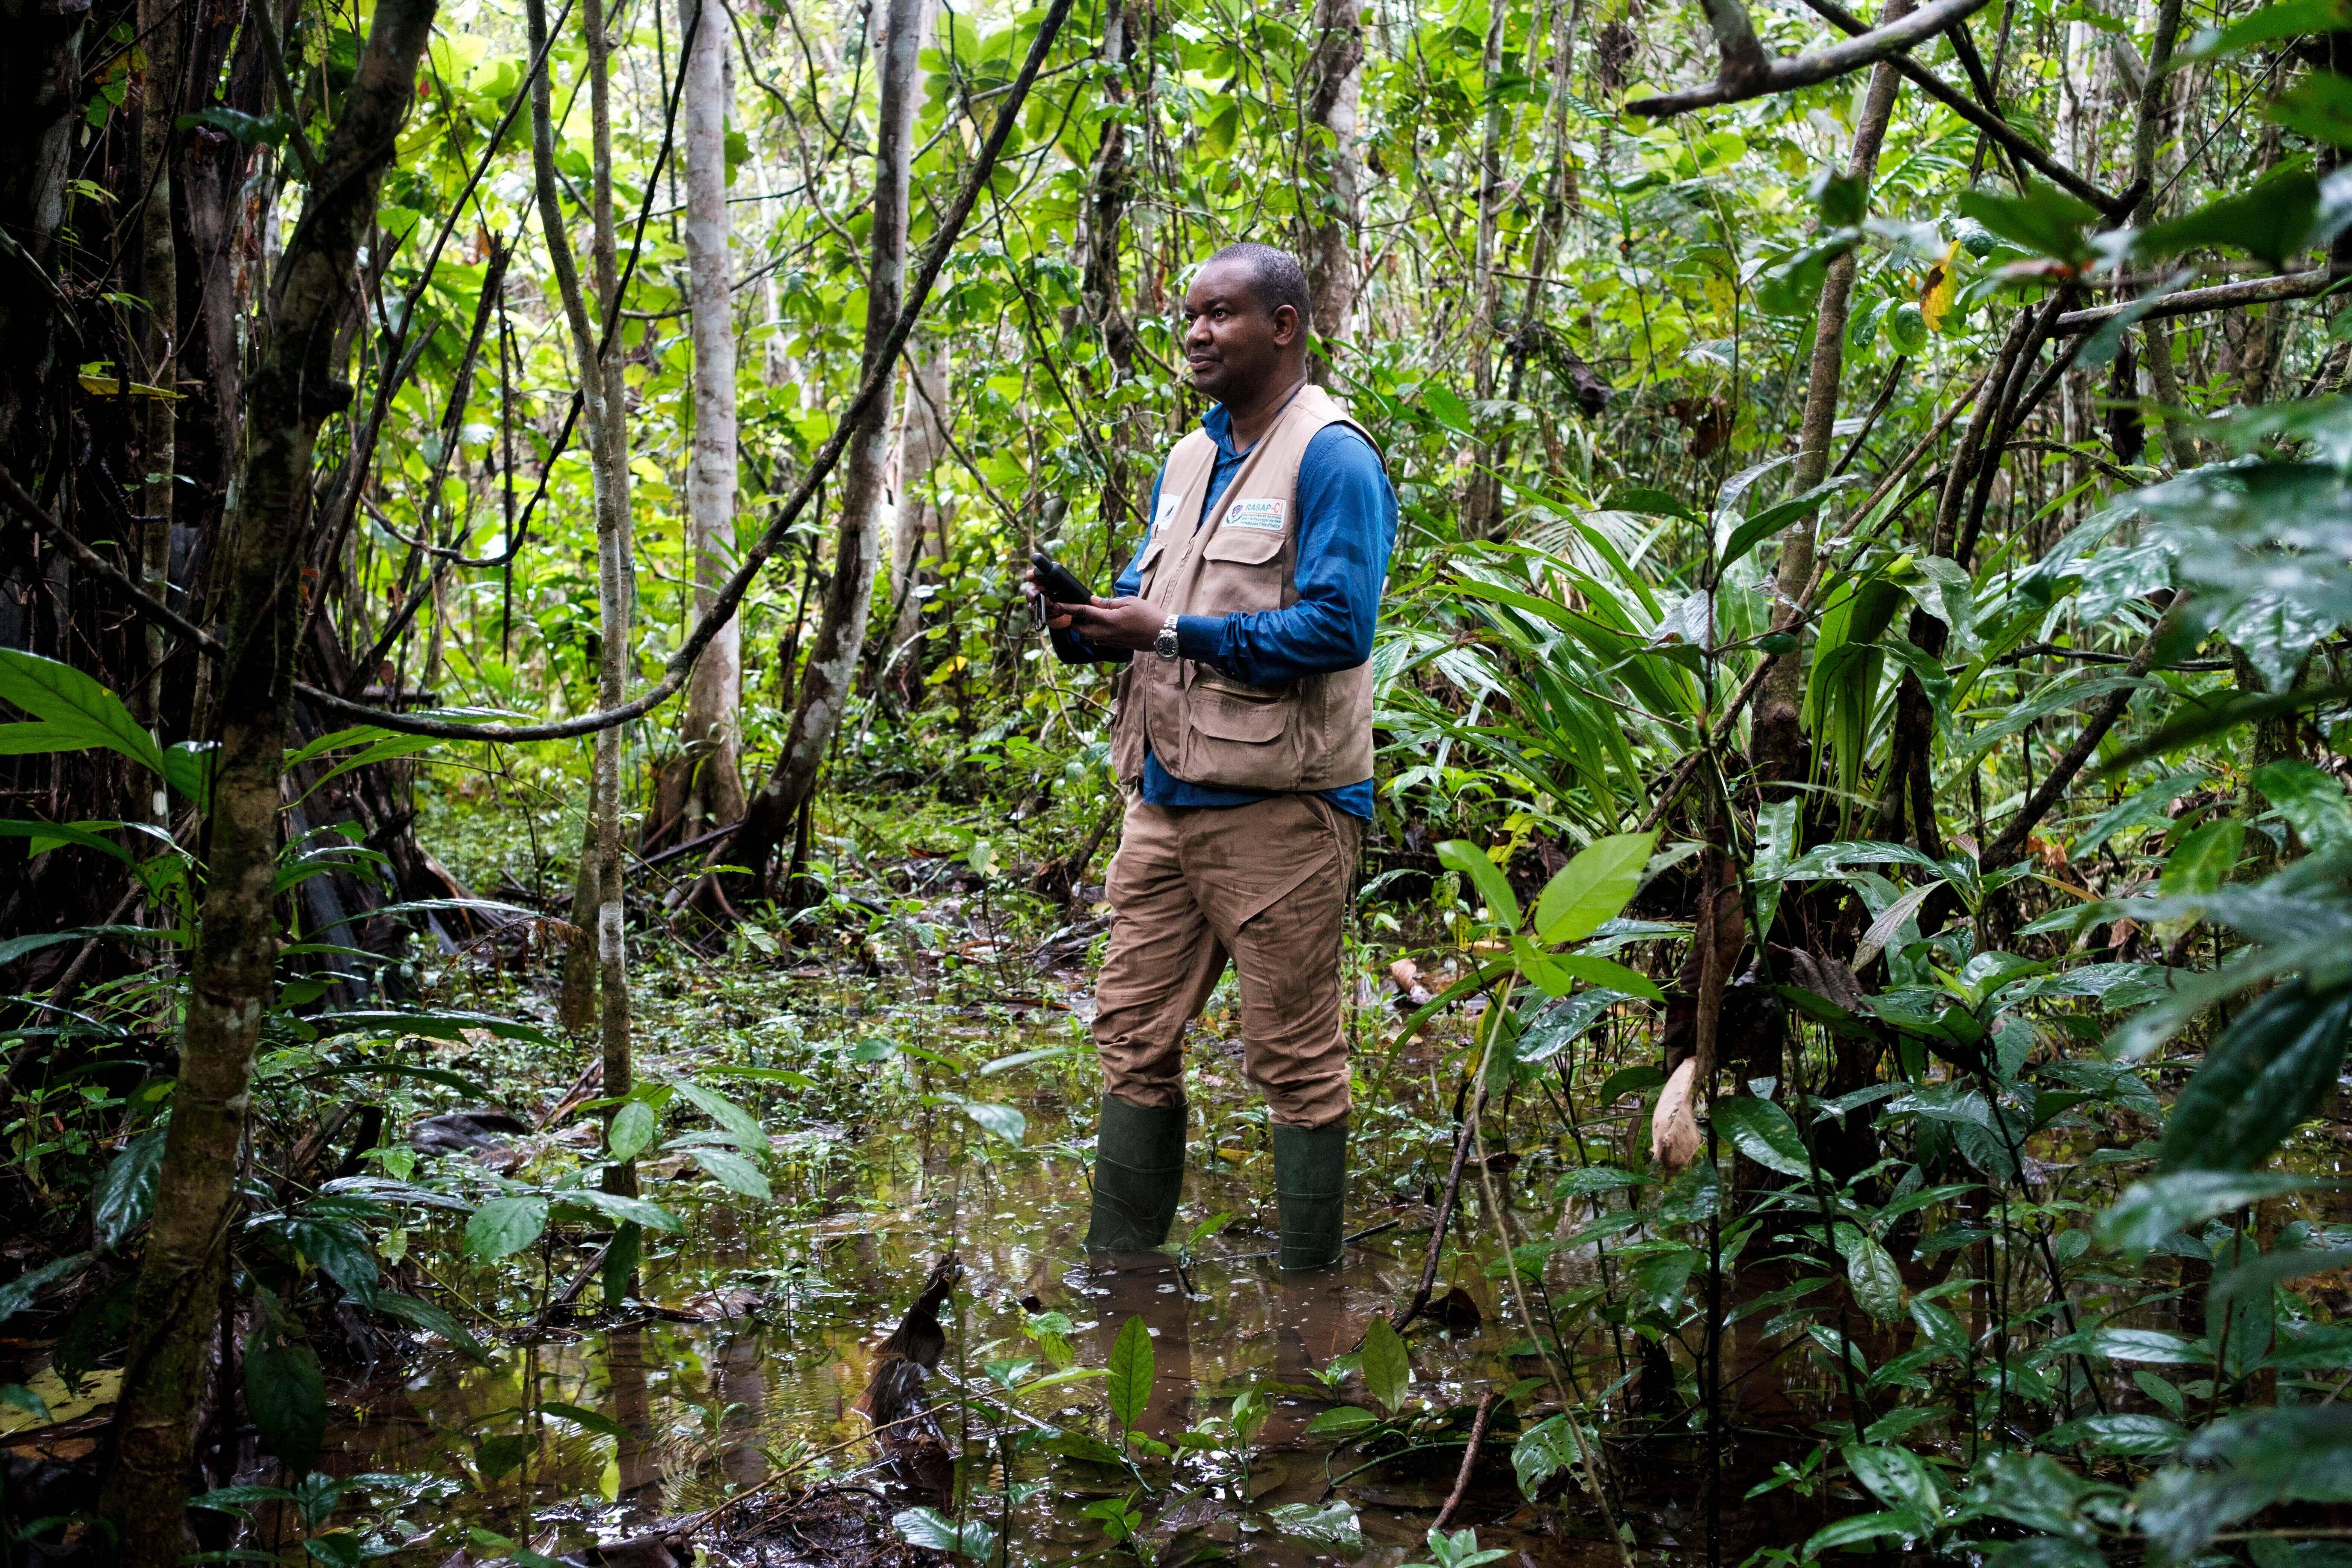 Rolex Awards for Enterprise Laureate Inza Koné in the Tanoé-Ehy Forest in south-eastern Côte d’Ivoire. Koné was the first primatologist from Côte d’Ivoire and one of the first in Africa.
© Rolex/Nyani Quarmyne